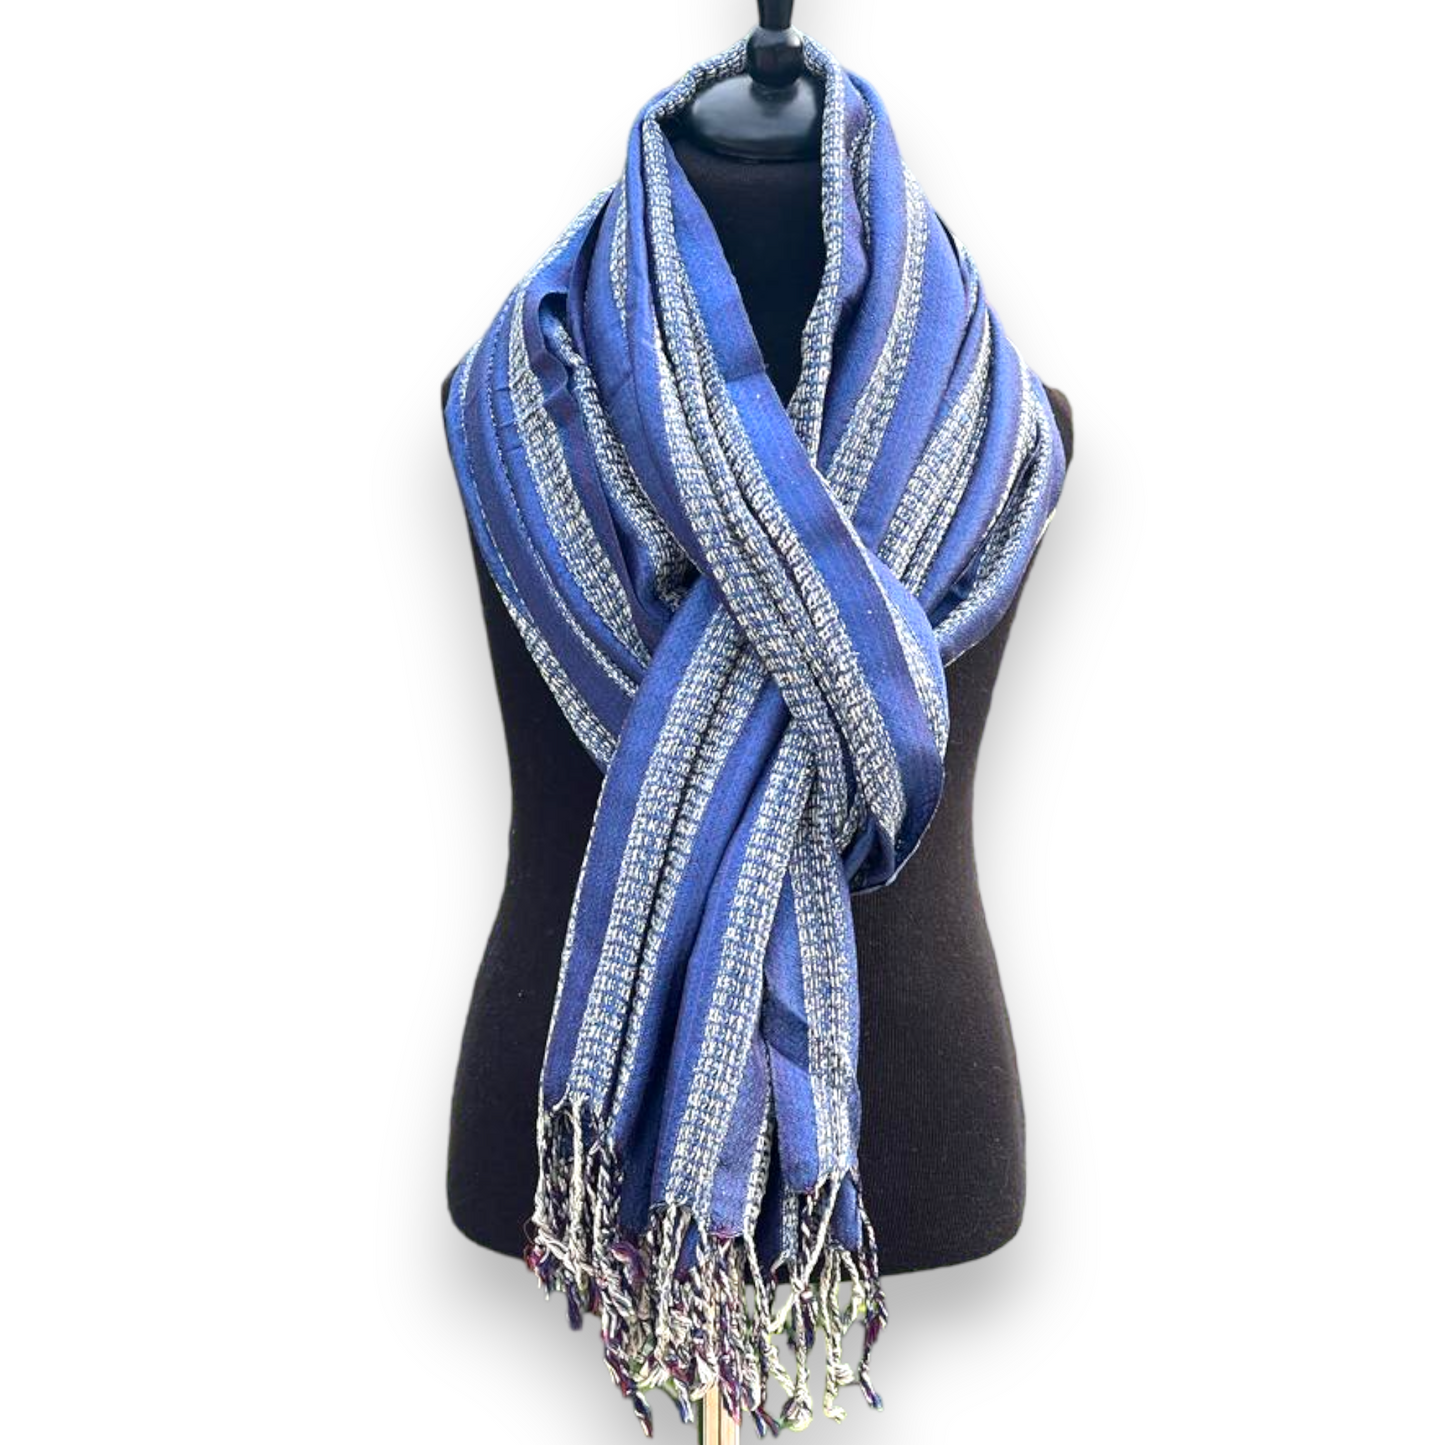 Pure Silk Hand-Woven Scarf from Antochia